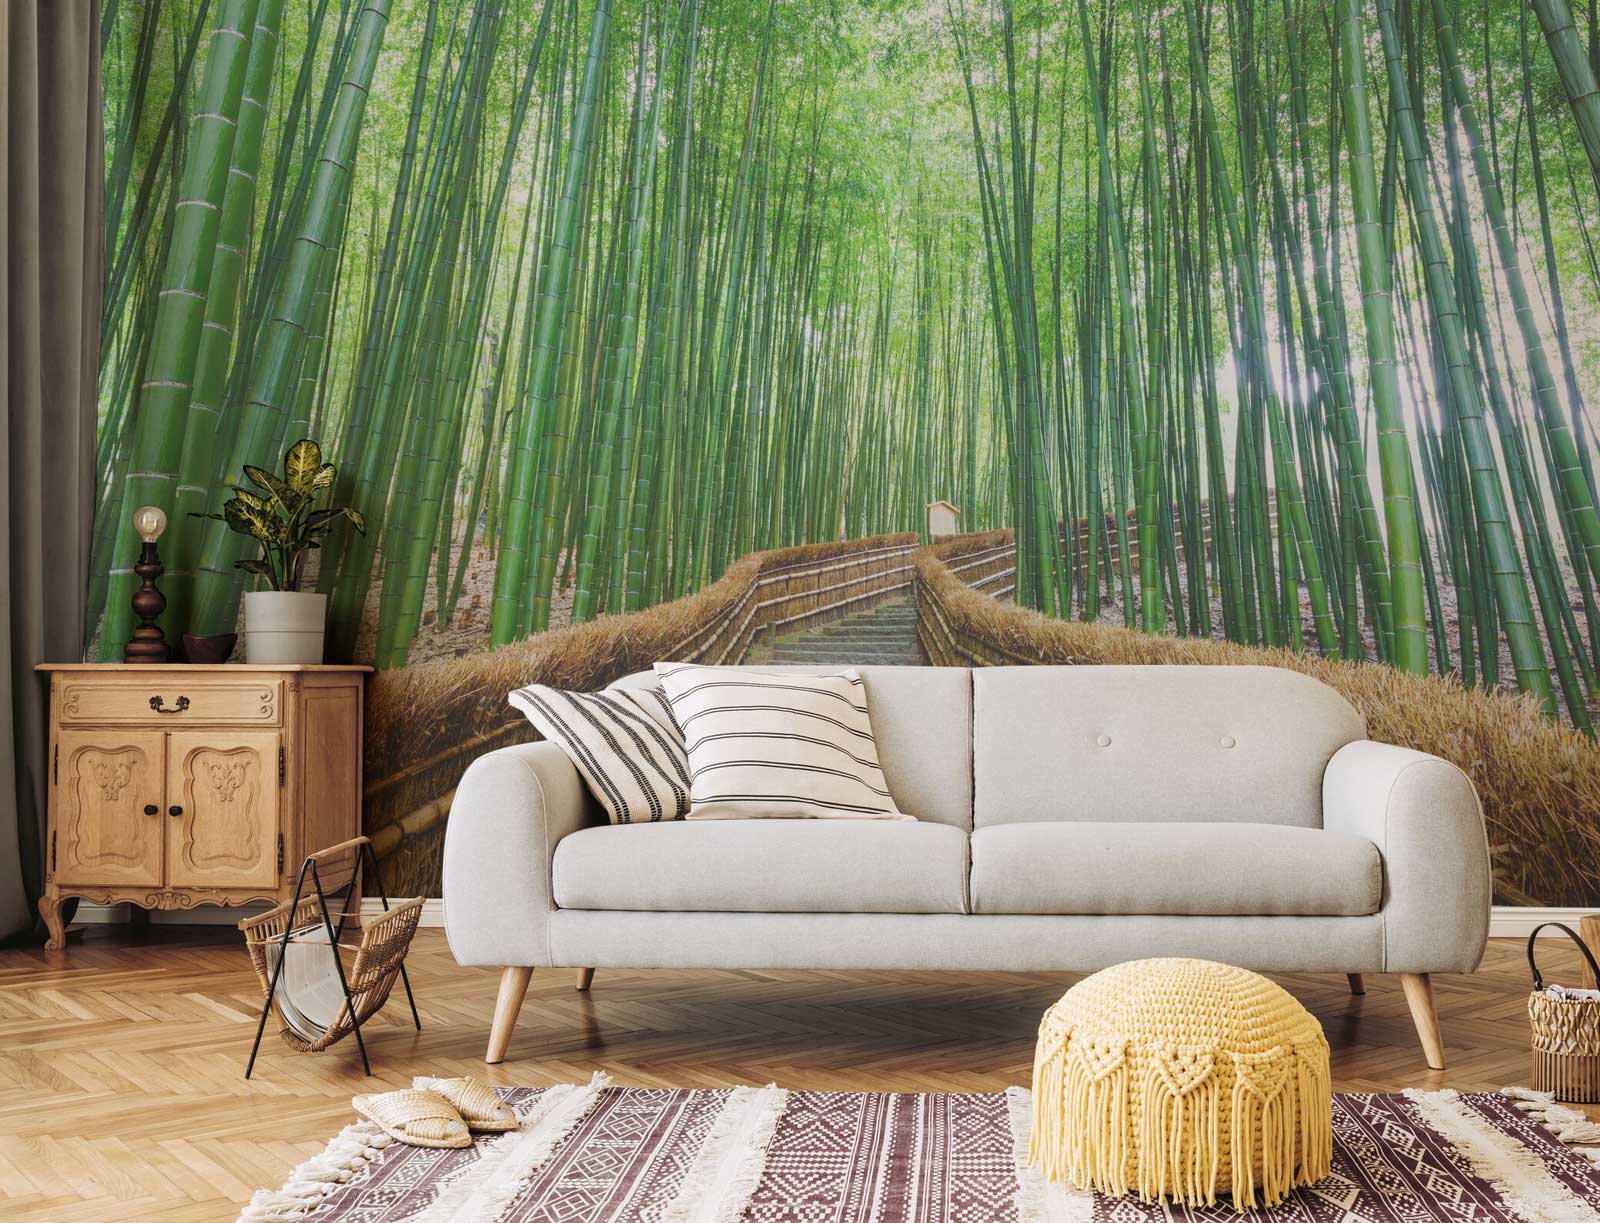 Retro Bamboo Forest 3D Murals Bamboo Wallpaper For Living Room, TV Sofa,  And Background Wall Art From Yiwuwallpaper, $16.39